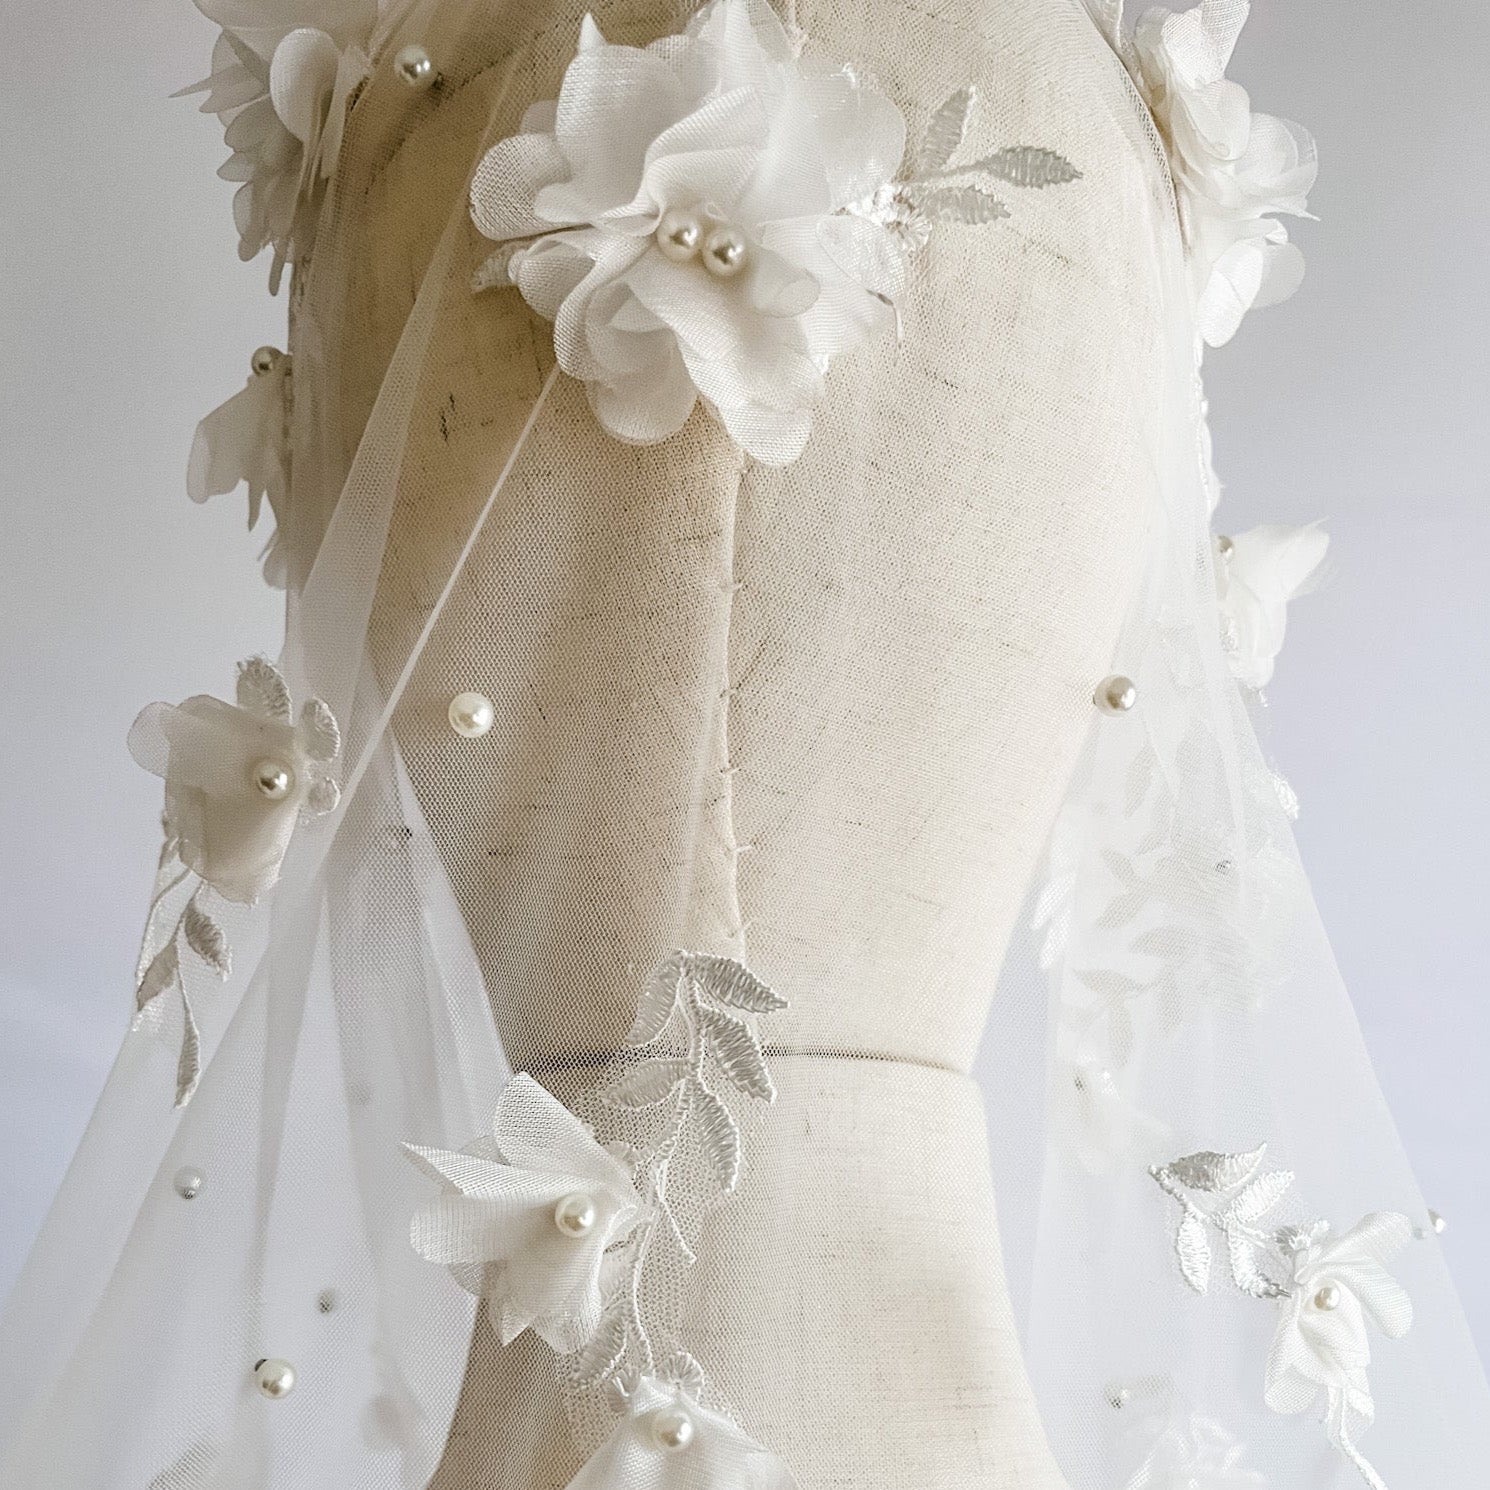 Stunning 3D Flower Lace Wedding Veil with Pearls Cathedral Veil